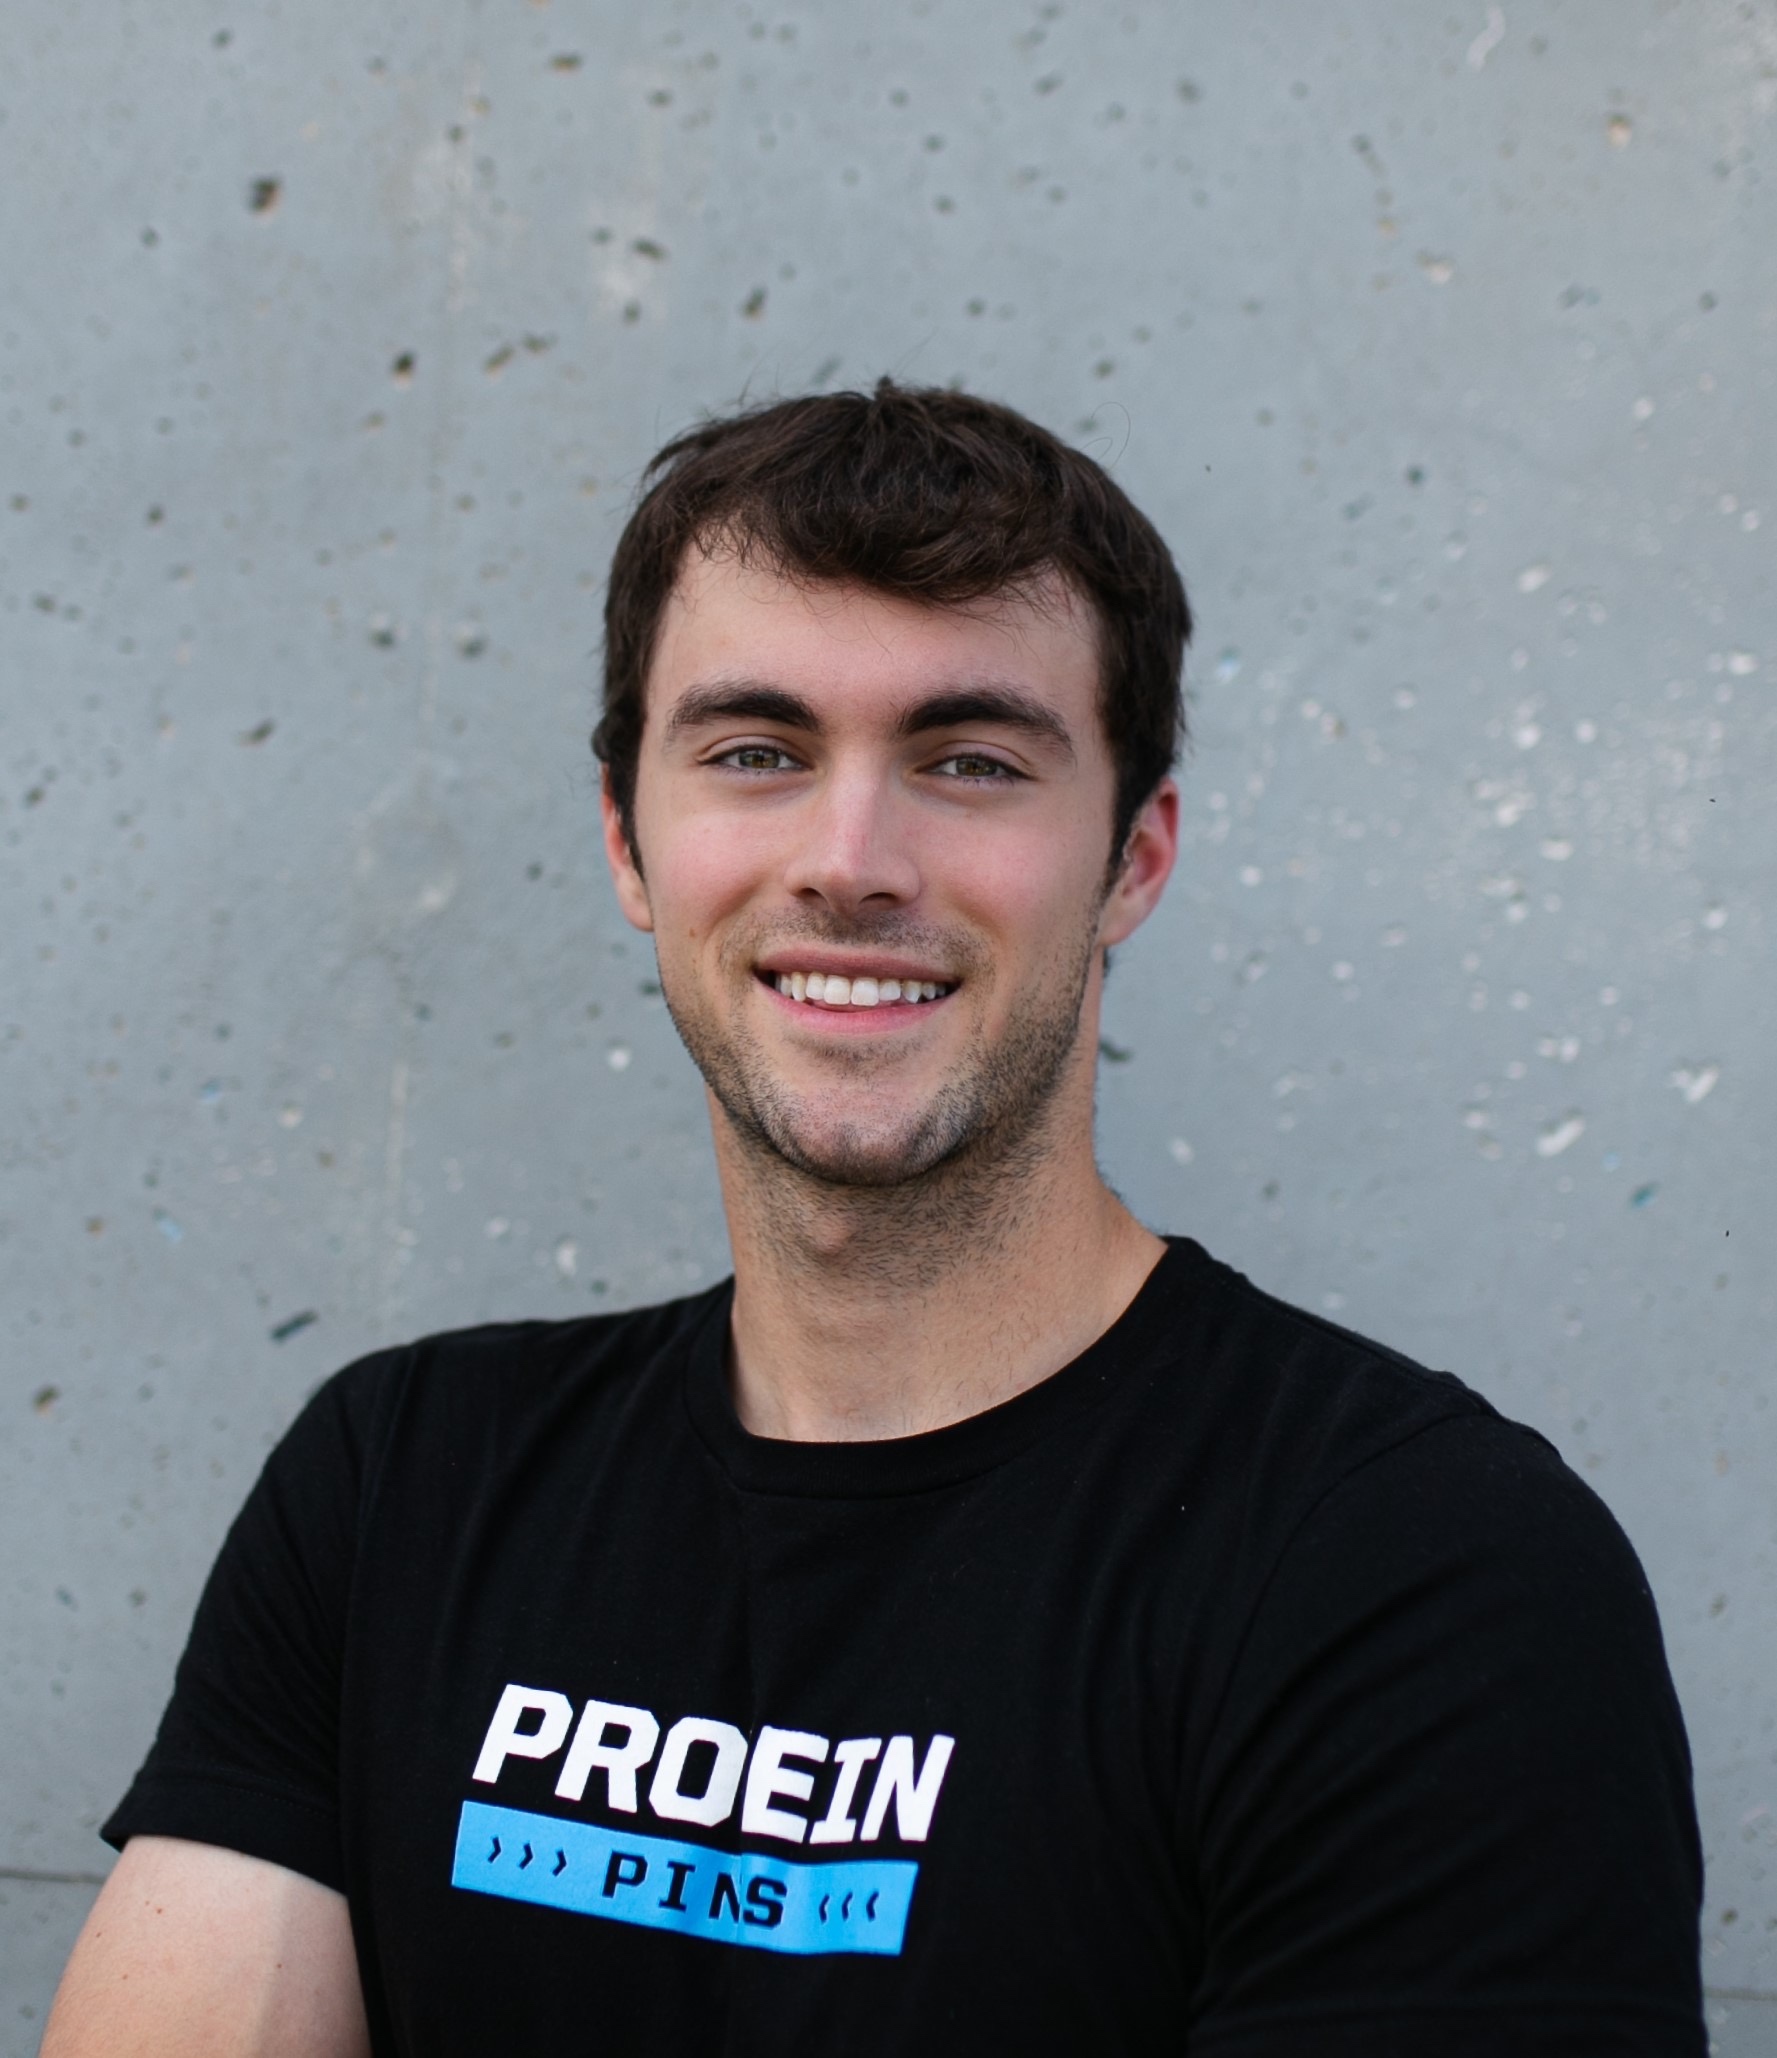 Paul Riess poses in front of a wall wearing a black Protein Pints t-shirt